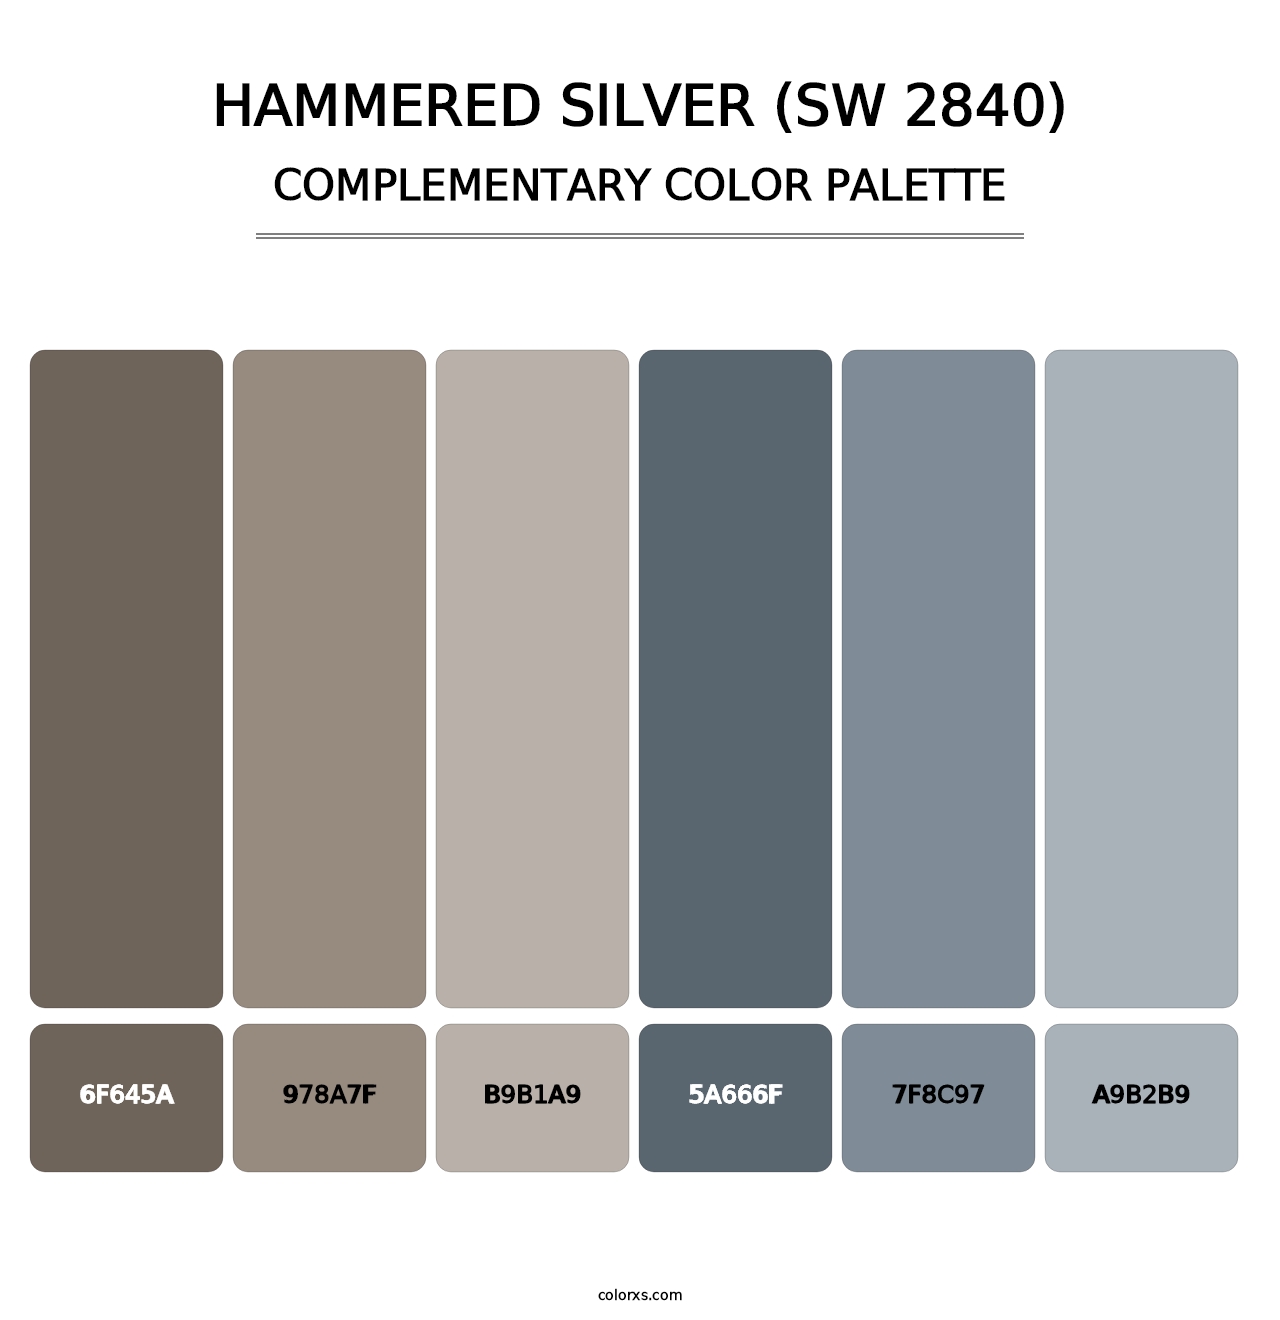 Hammered Silver (SW 2840) - Complementary Color Palette